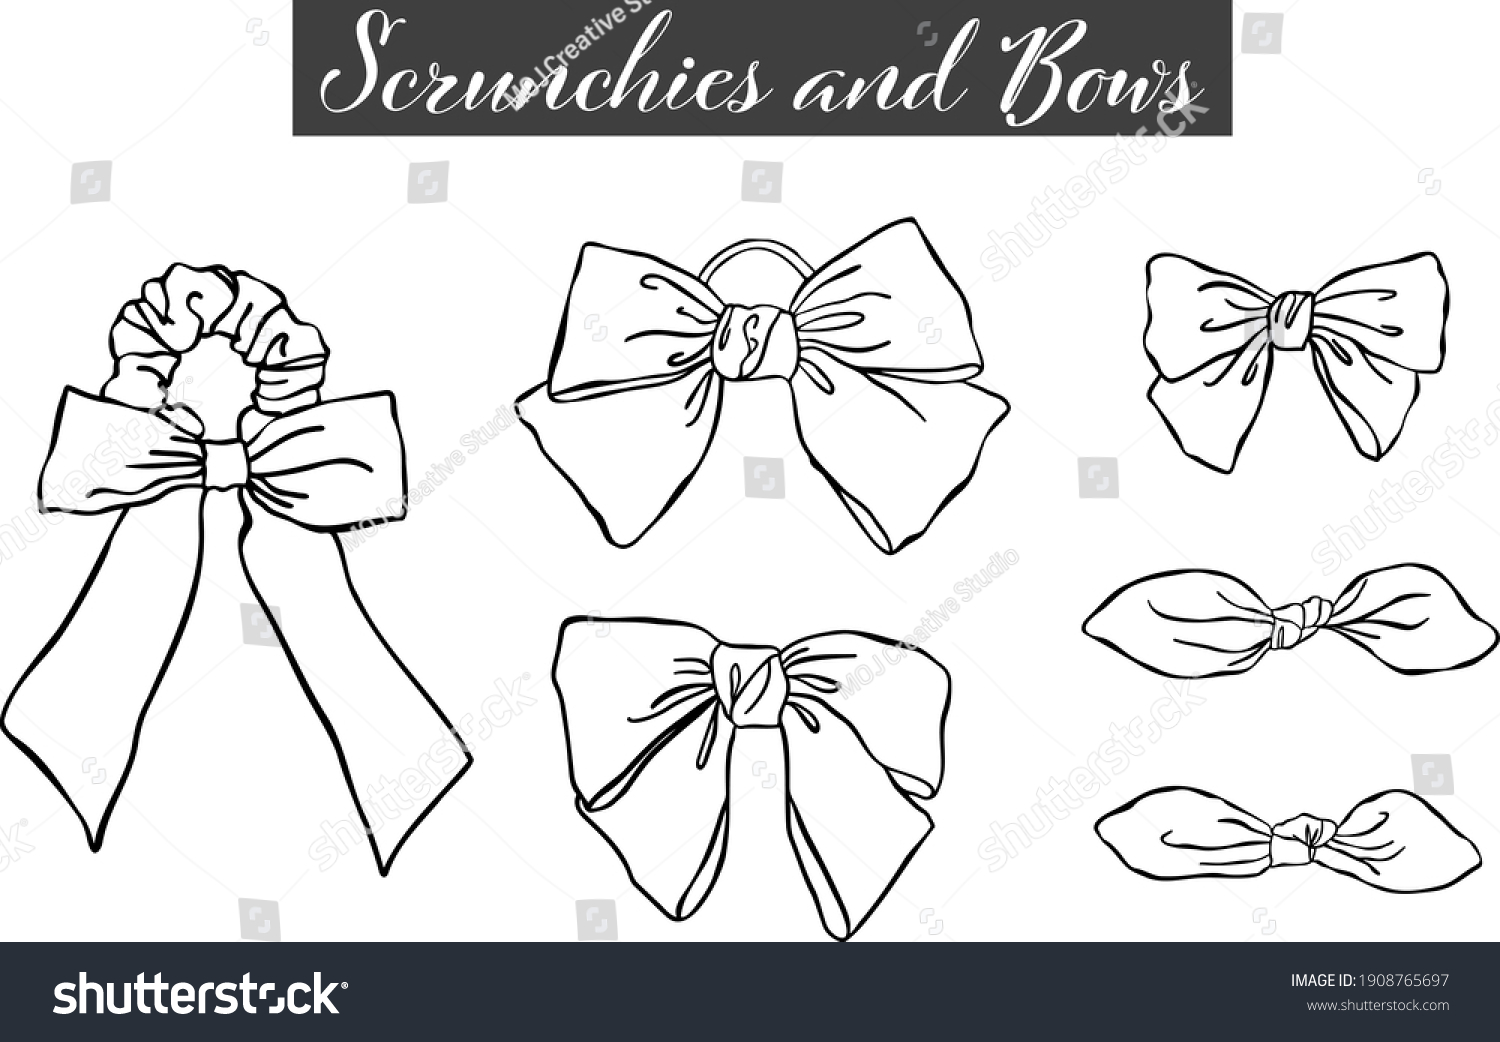 Collection Doodled Scrunchies Bows Outline Vector Stock Vector (Royalty ...